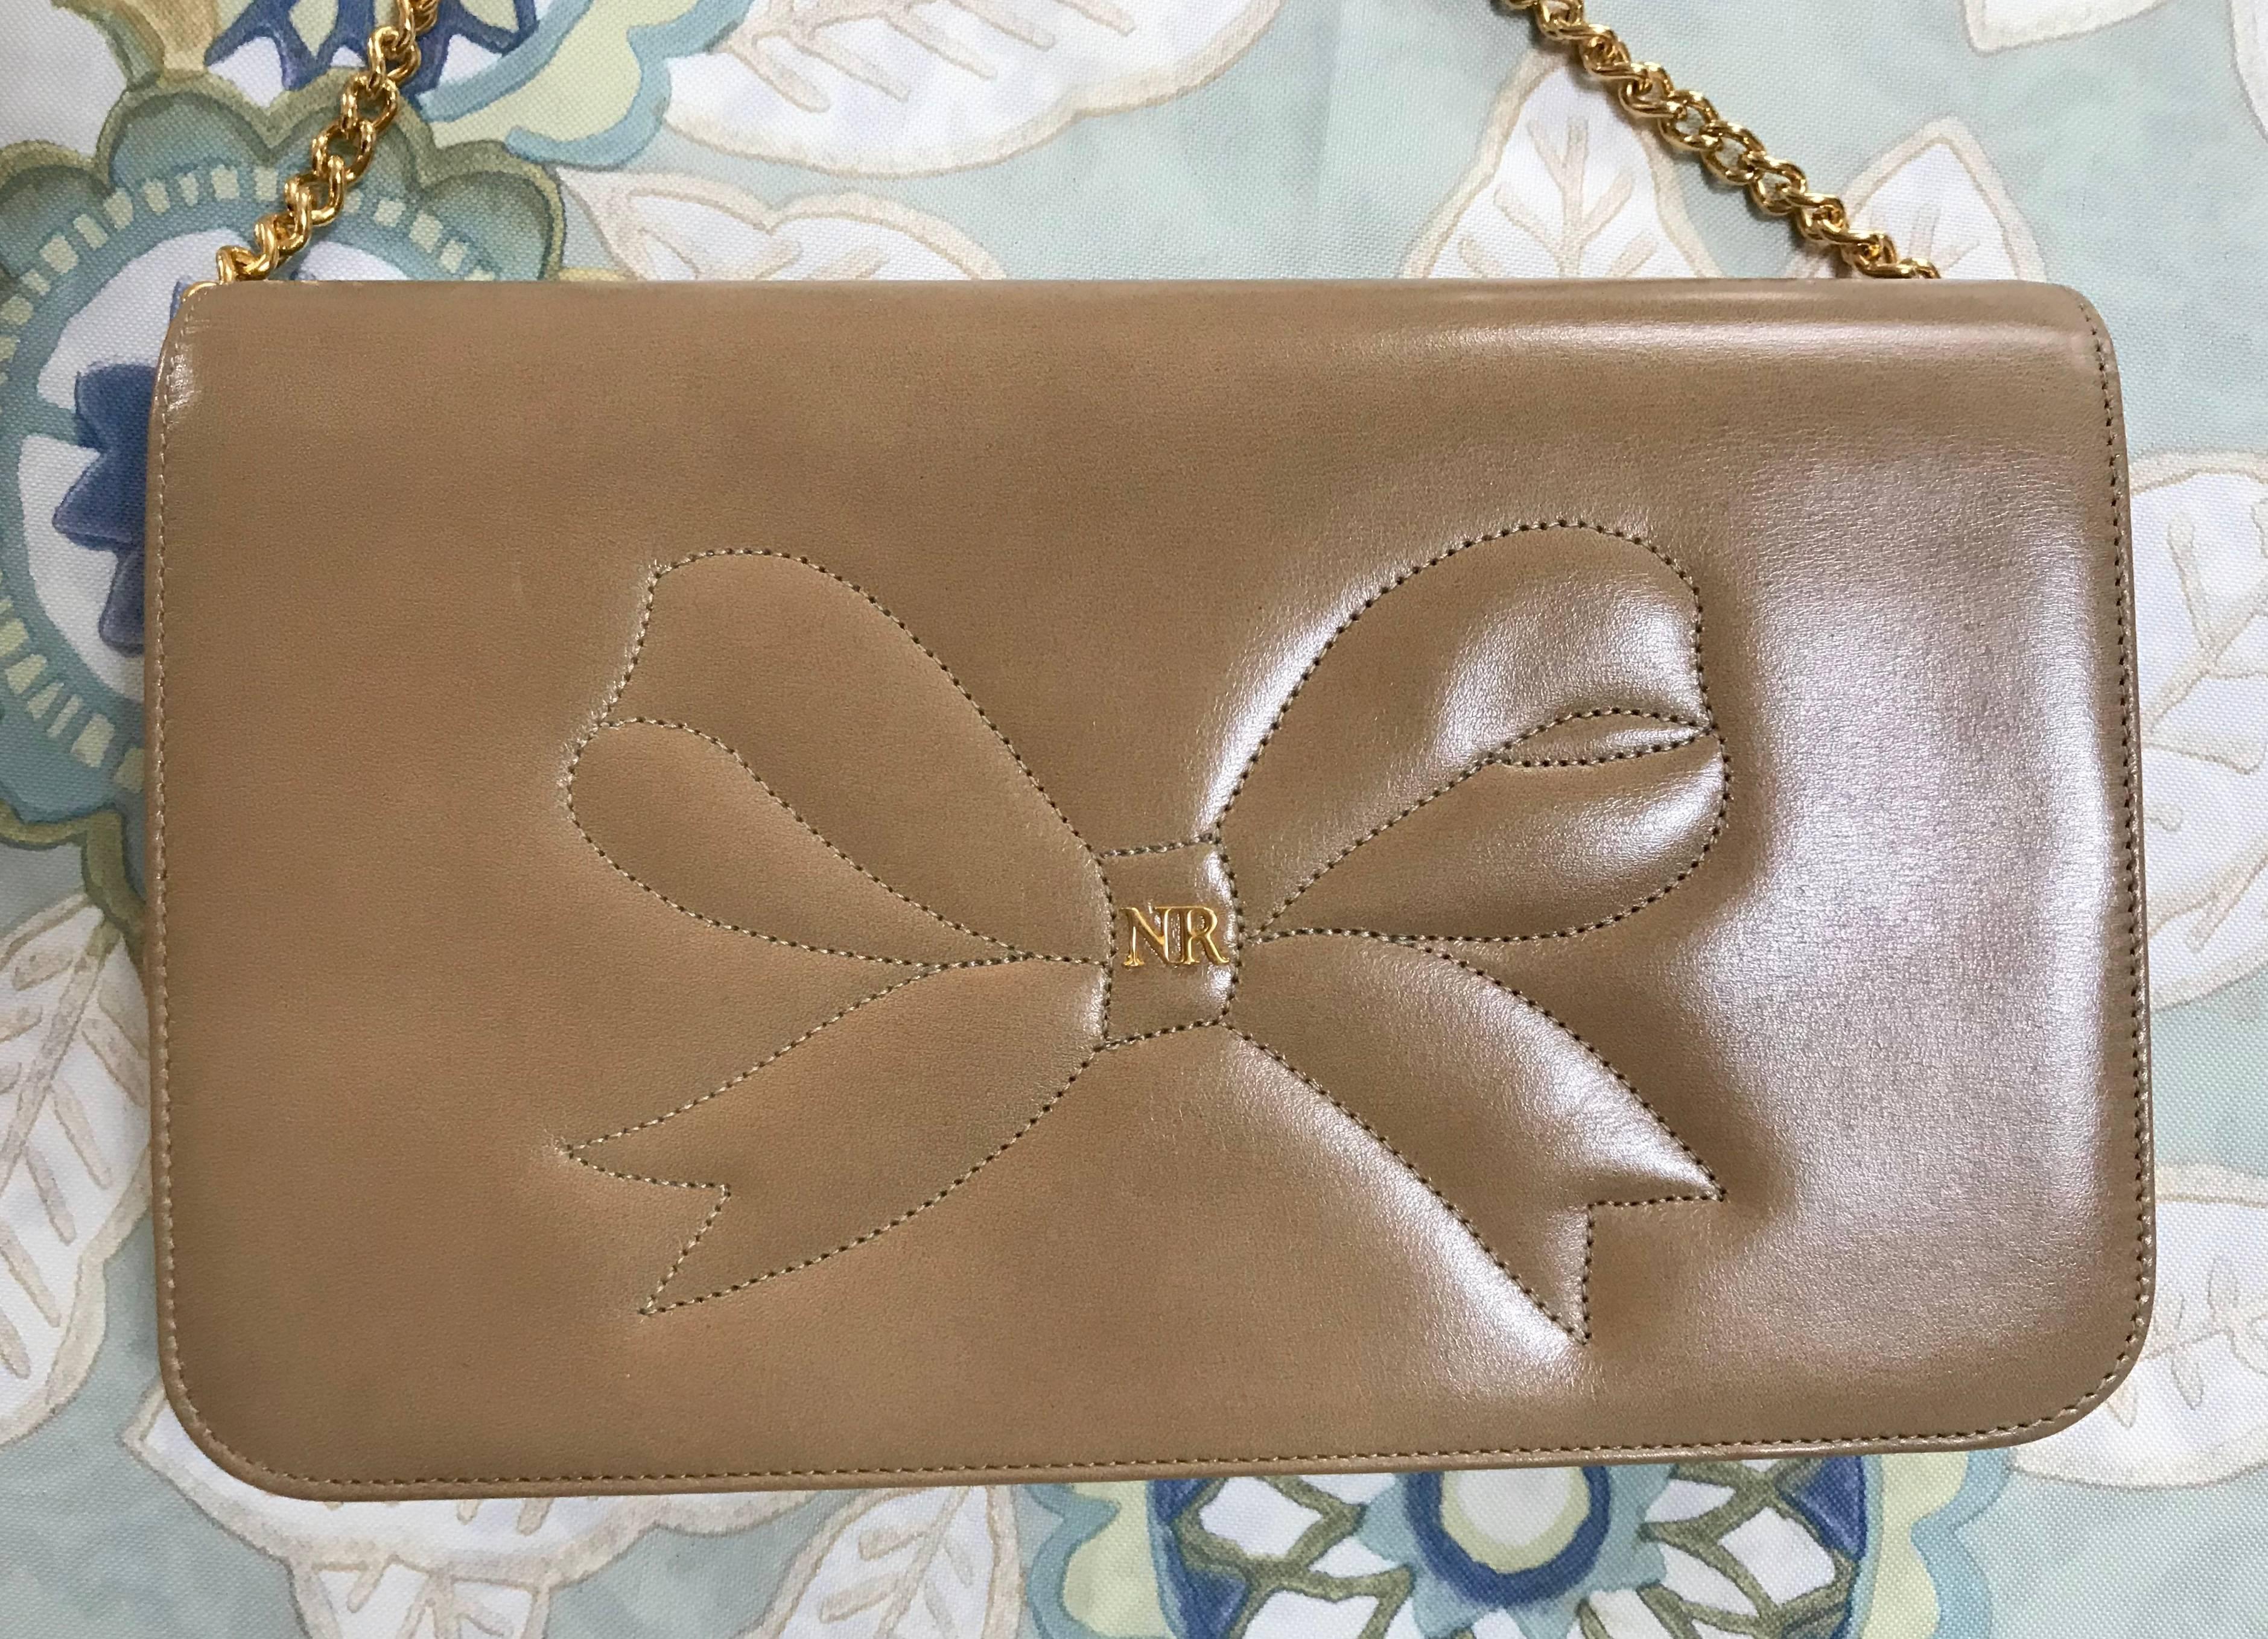 1990s. NEW, MINT. Vintage Nina Ricci beige leather clutch shoulder bag with a large bow stitch and golden chain. Perfect party purse. 

Introducing another cutest and rare vintage purse from Nina Ricci. A beige leather chain shoulder clutch shoulder